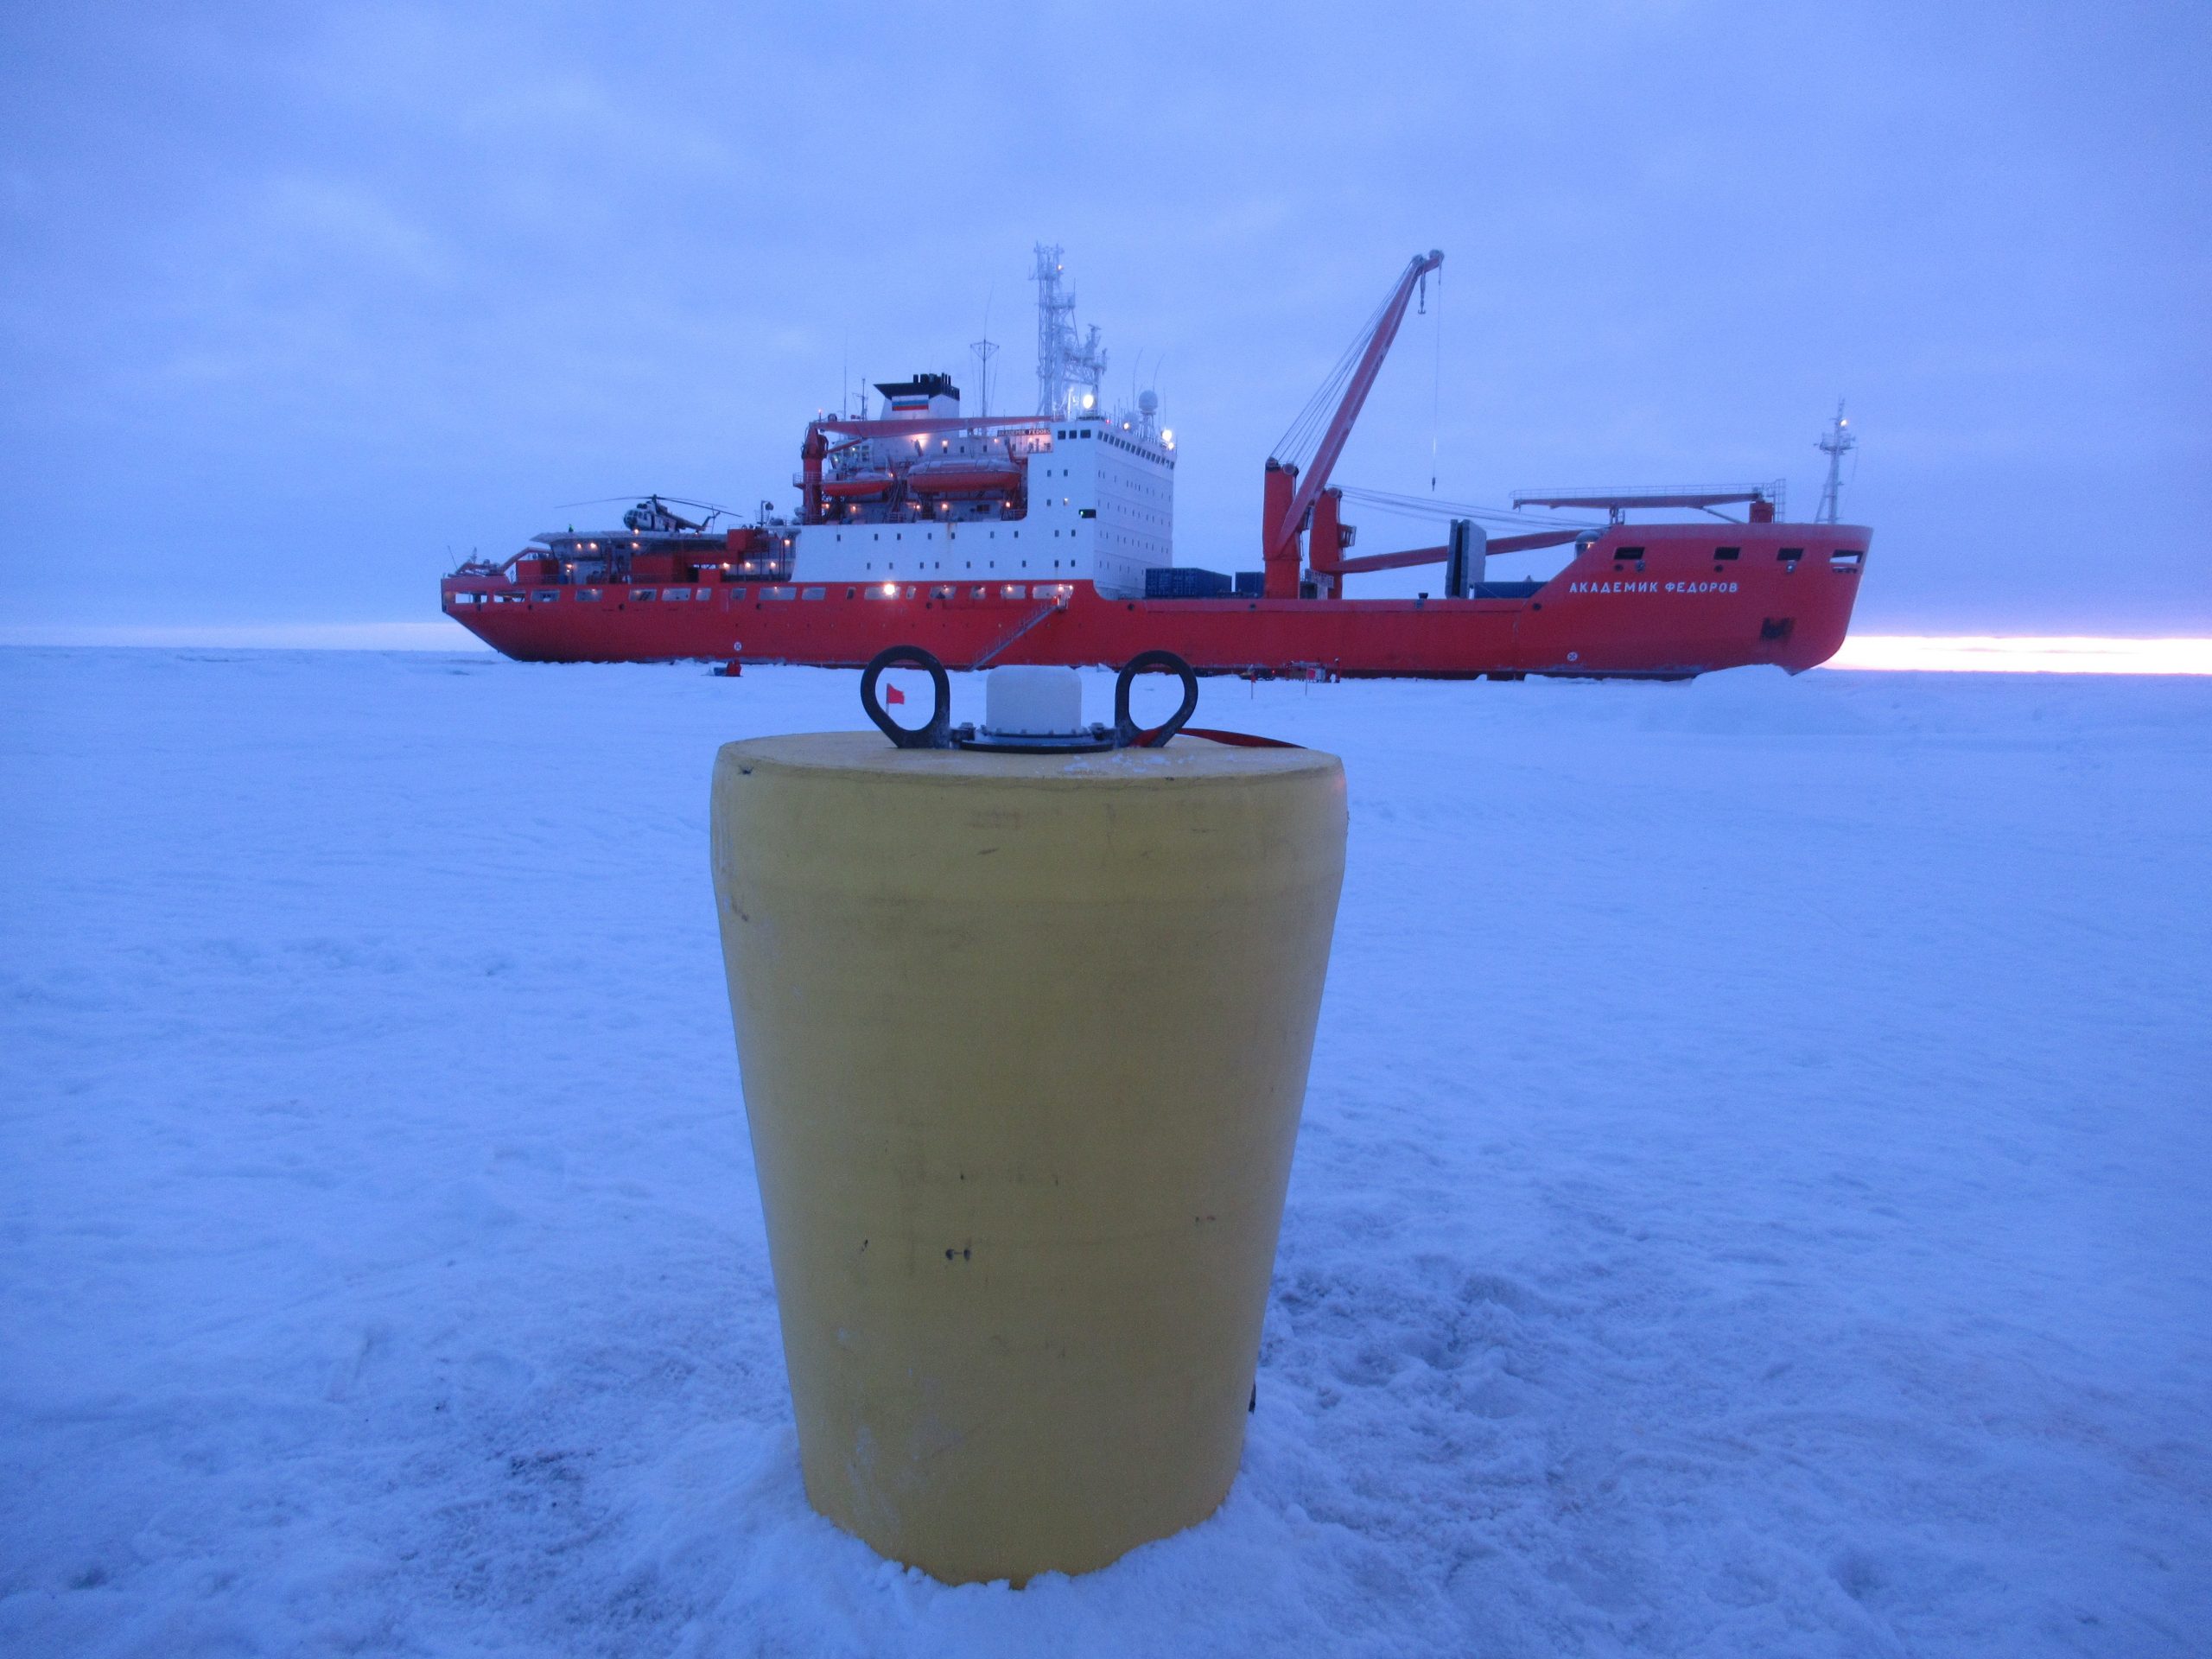 ITP 102 final deployment position with Akademik Fedorov in background. (Photo by Andy Davies)